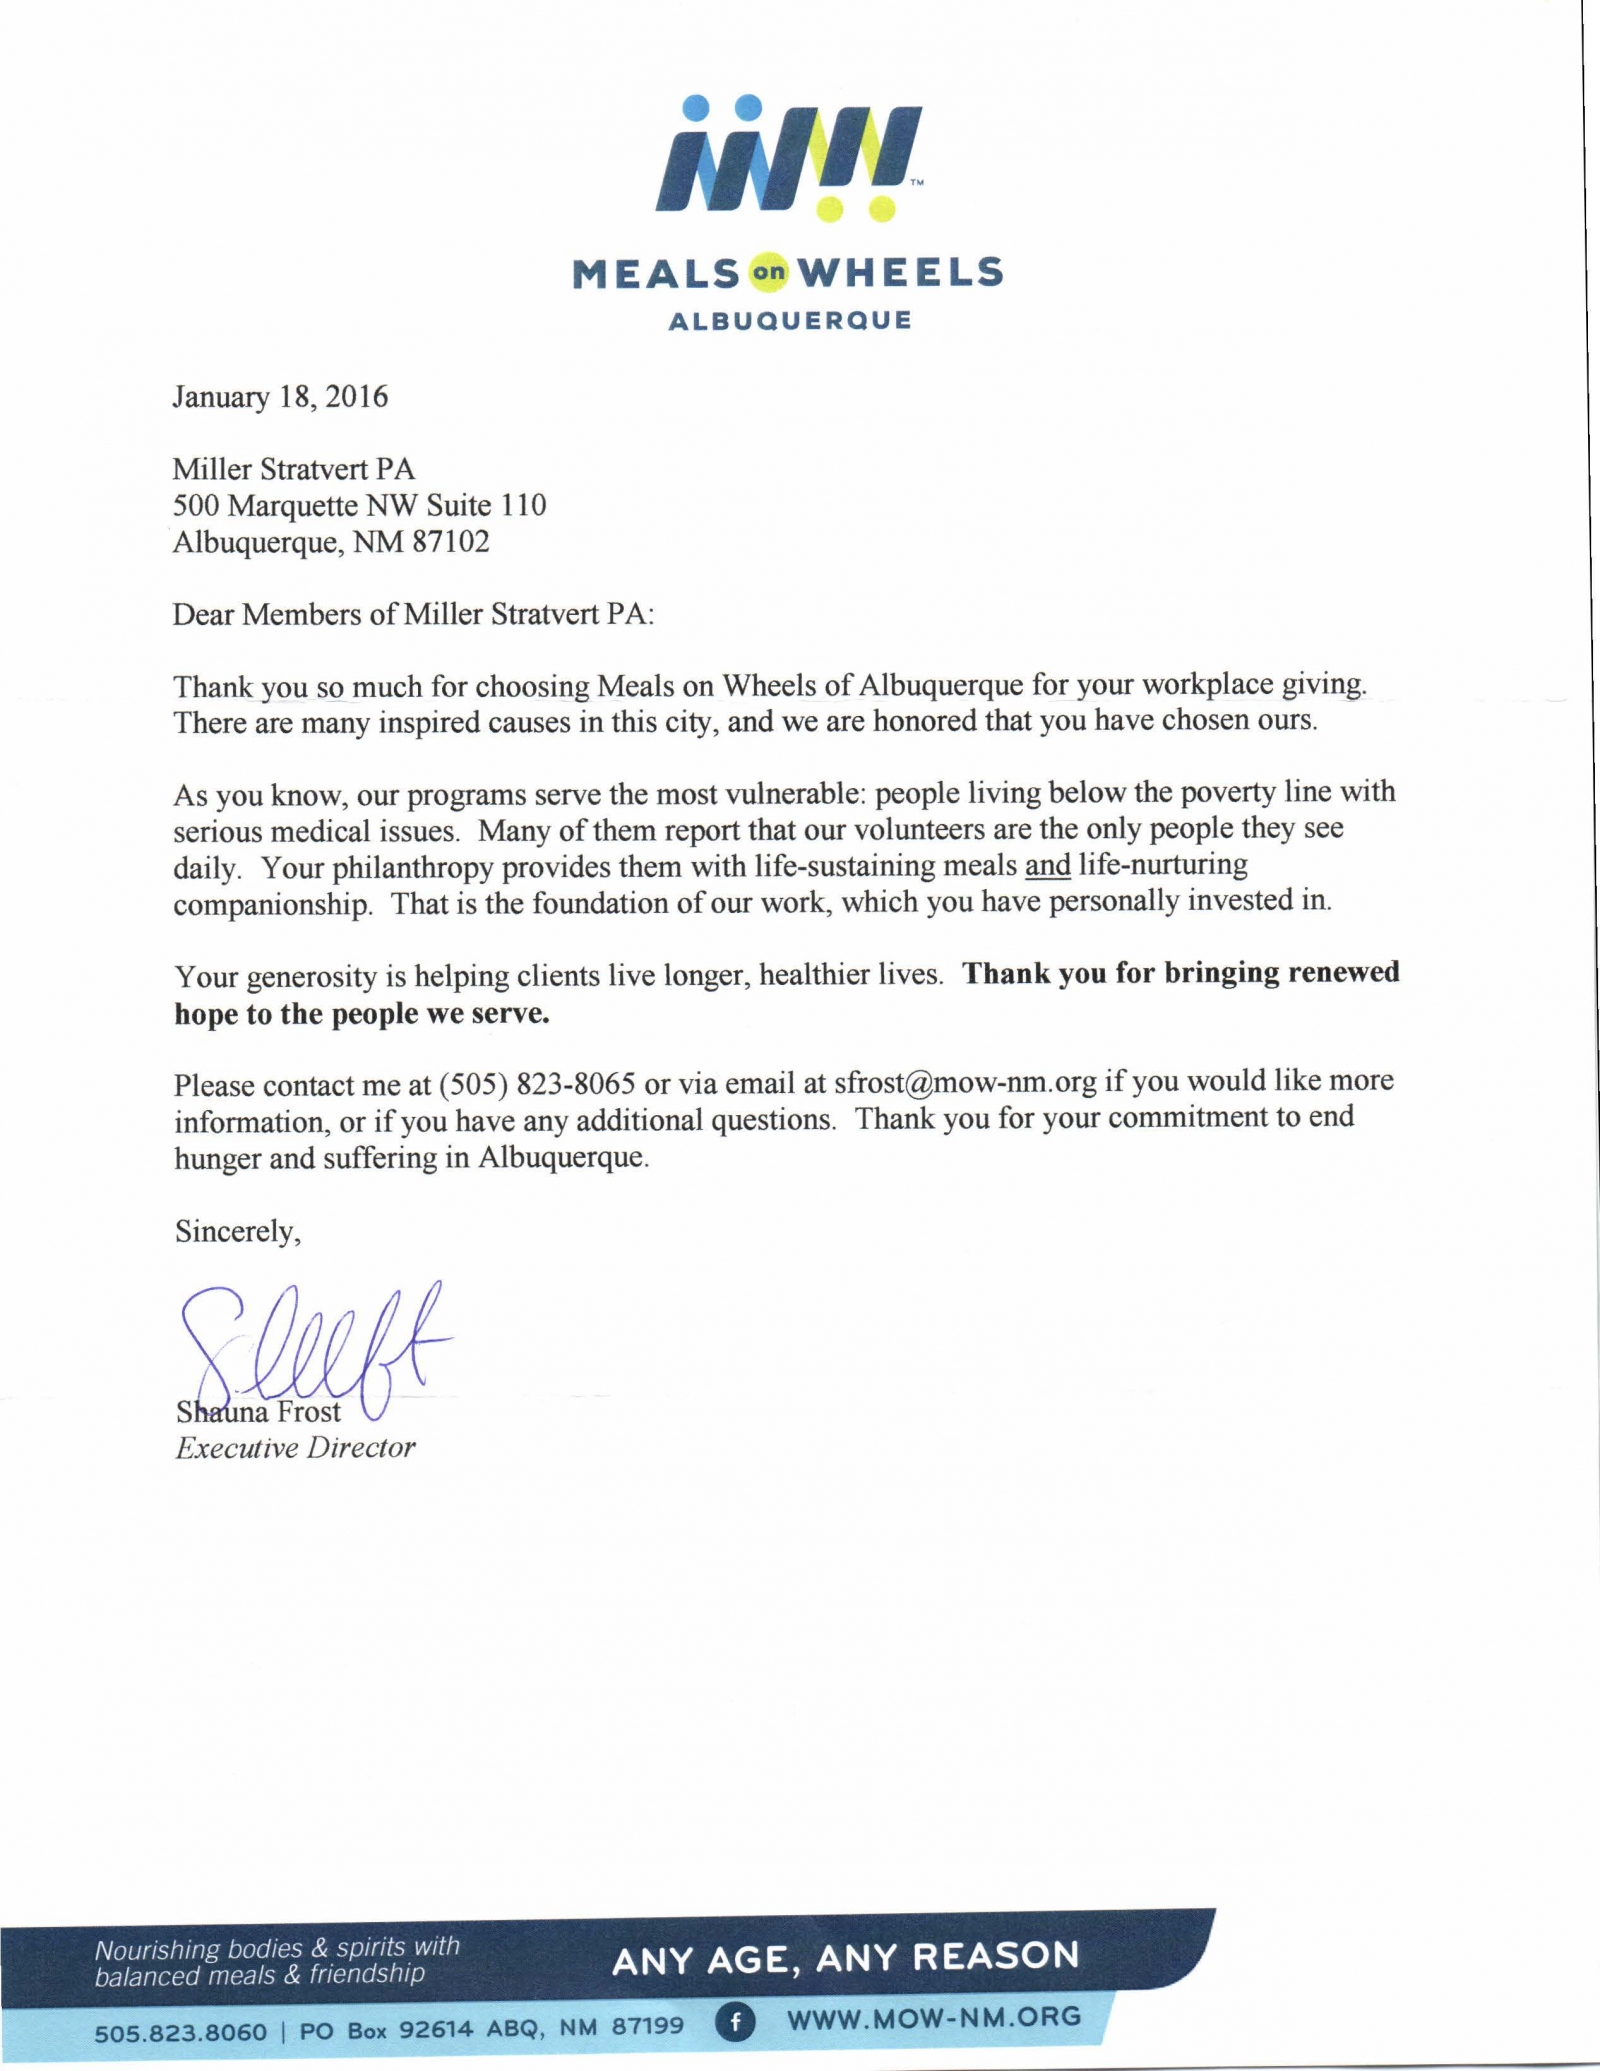 Miller Stratvert Chooses Meals on Wheels for our Workplace Giving